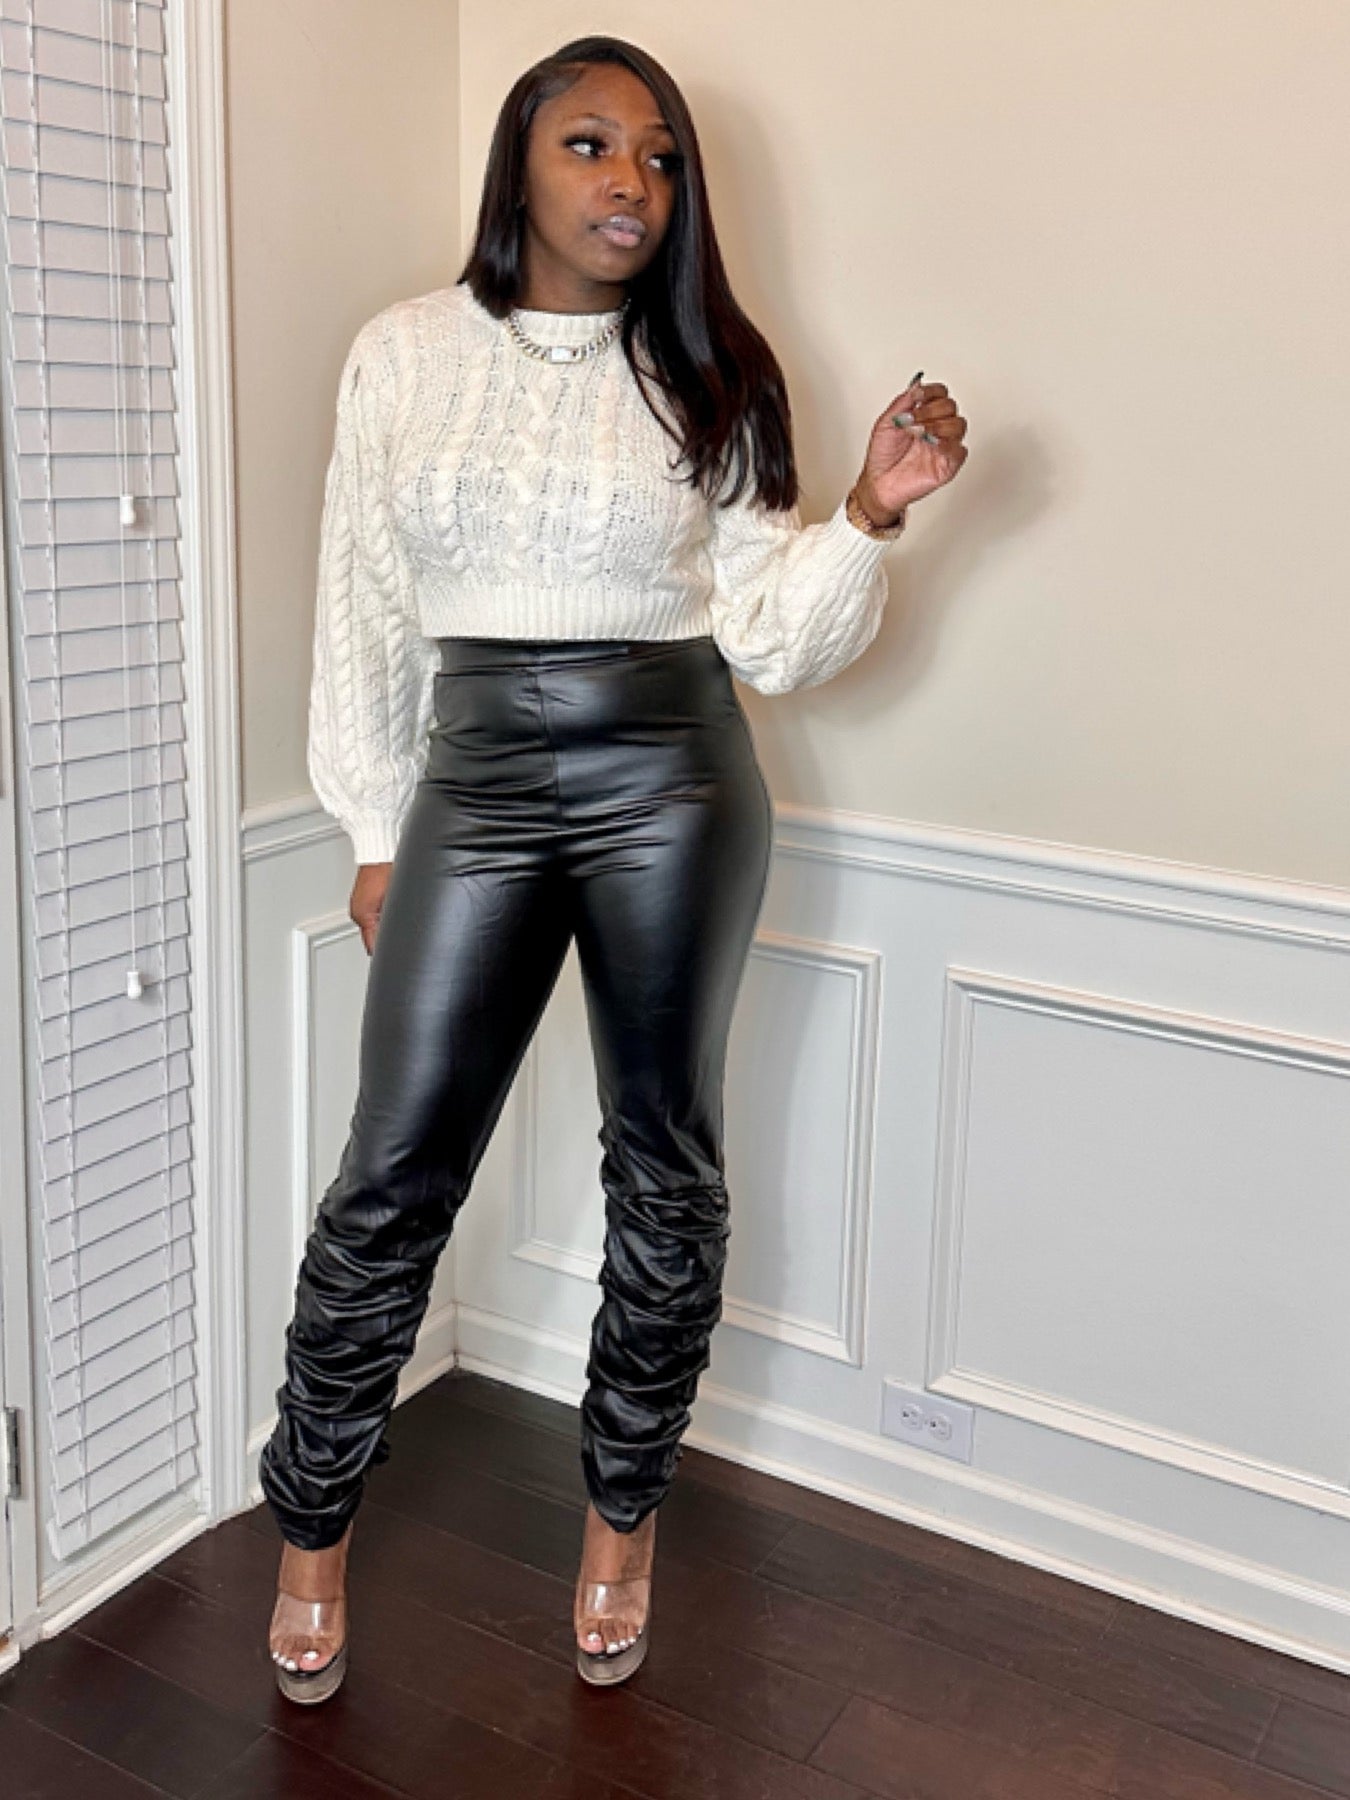 Leather Ruched Leggings  Black Leather Ruched Leggings  Leather Leggings  ruched wet look leggings  ruched bum leather leggings  black ruched leather pants  black leather ruched pants  ruched leather leggings